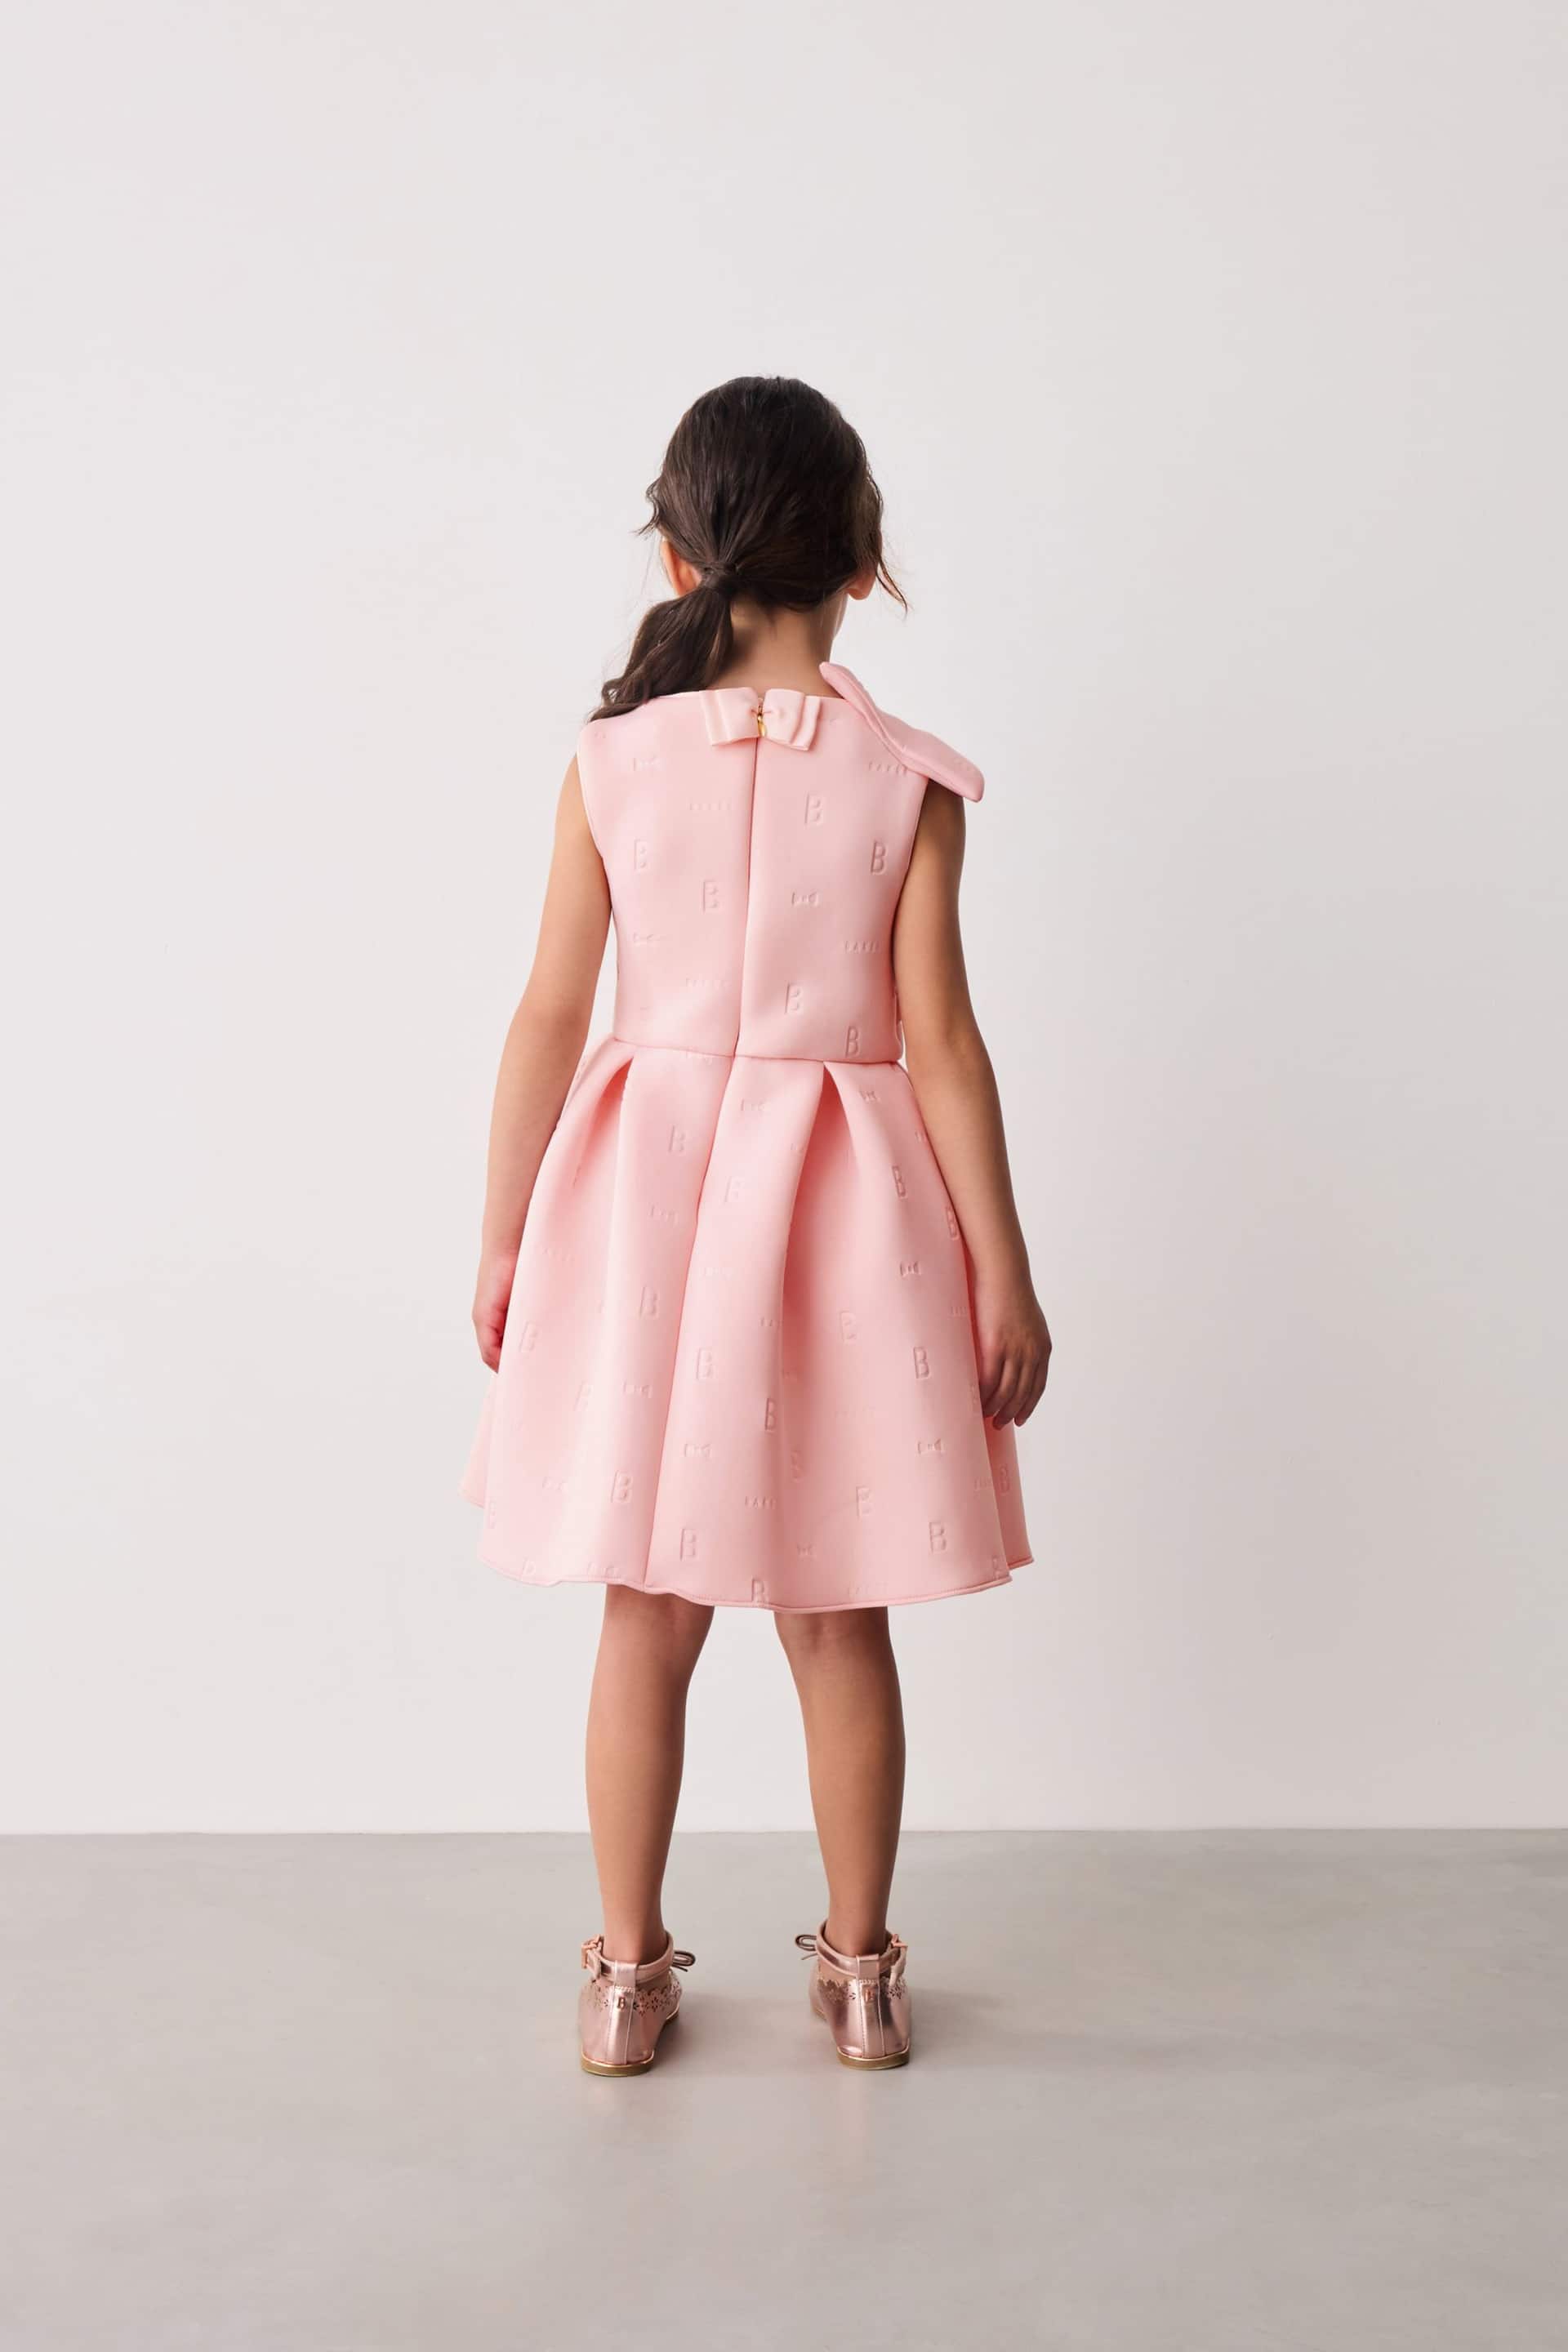 Baker by Ted Baker Bow Embossed Scuba Pink Dress - Image 2 of 5